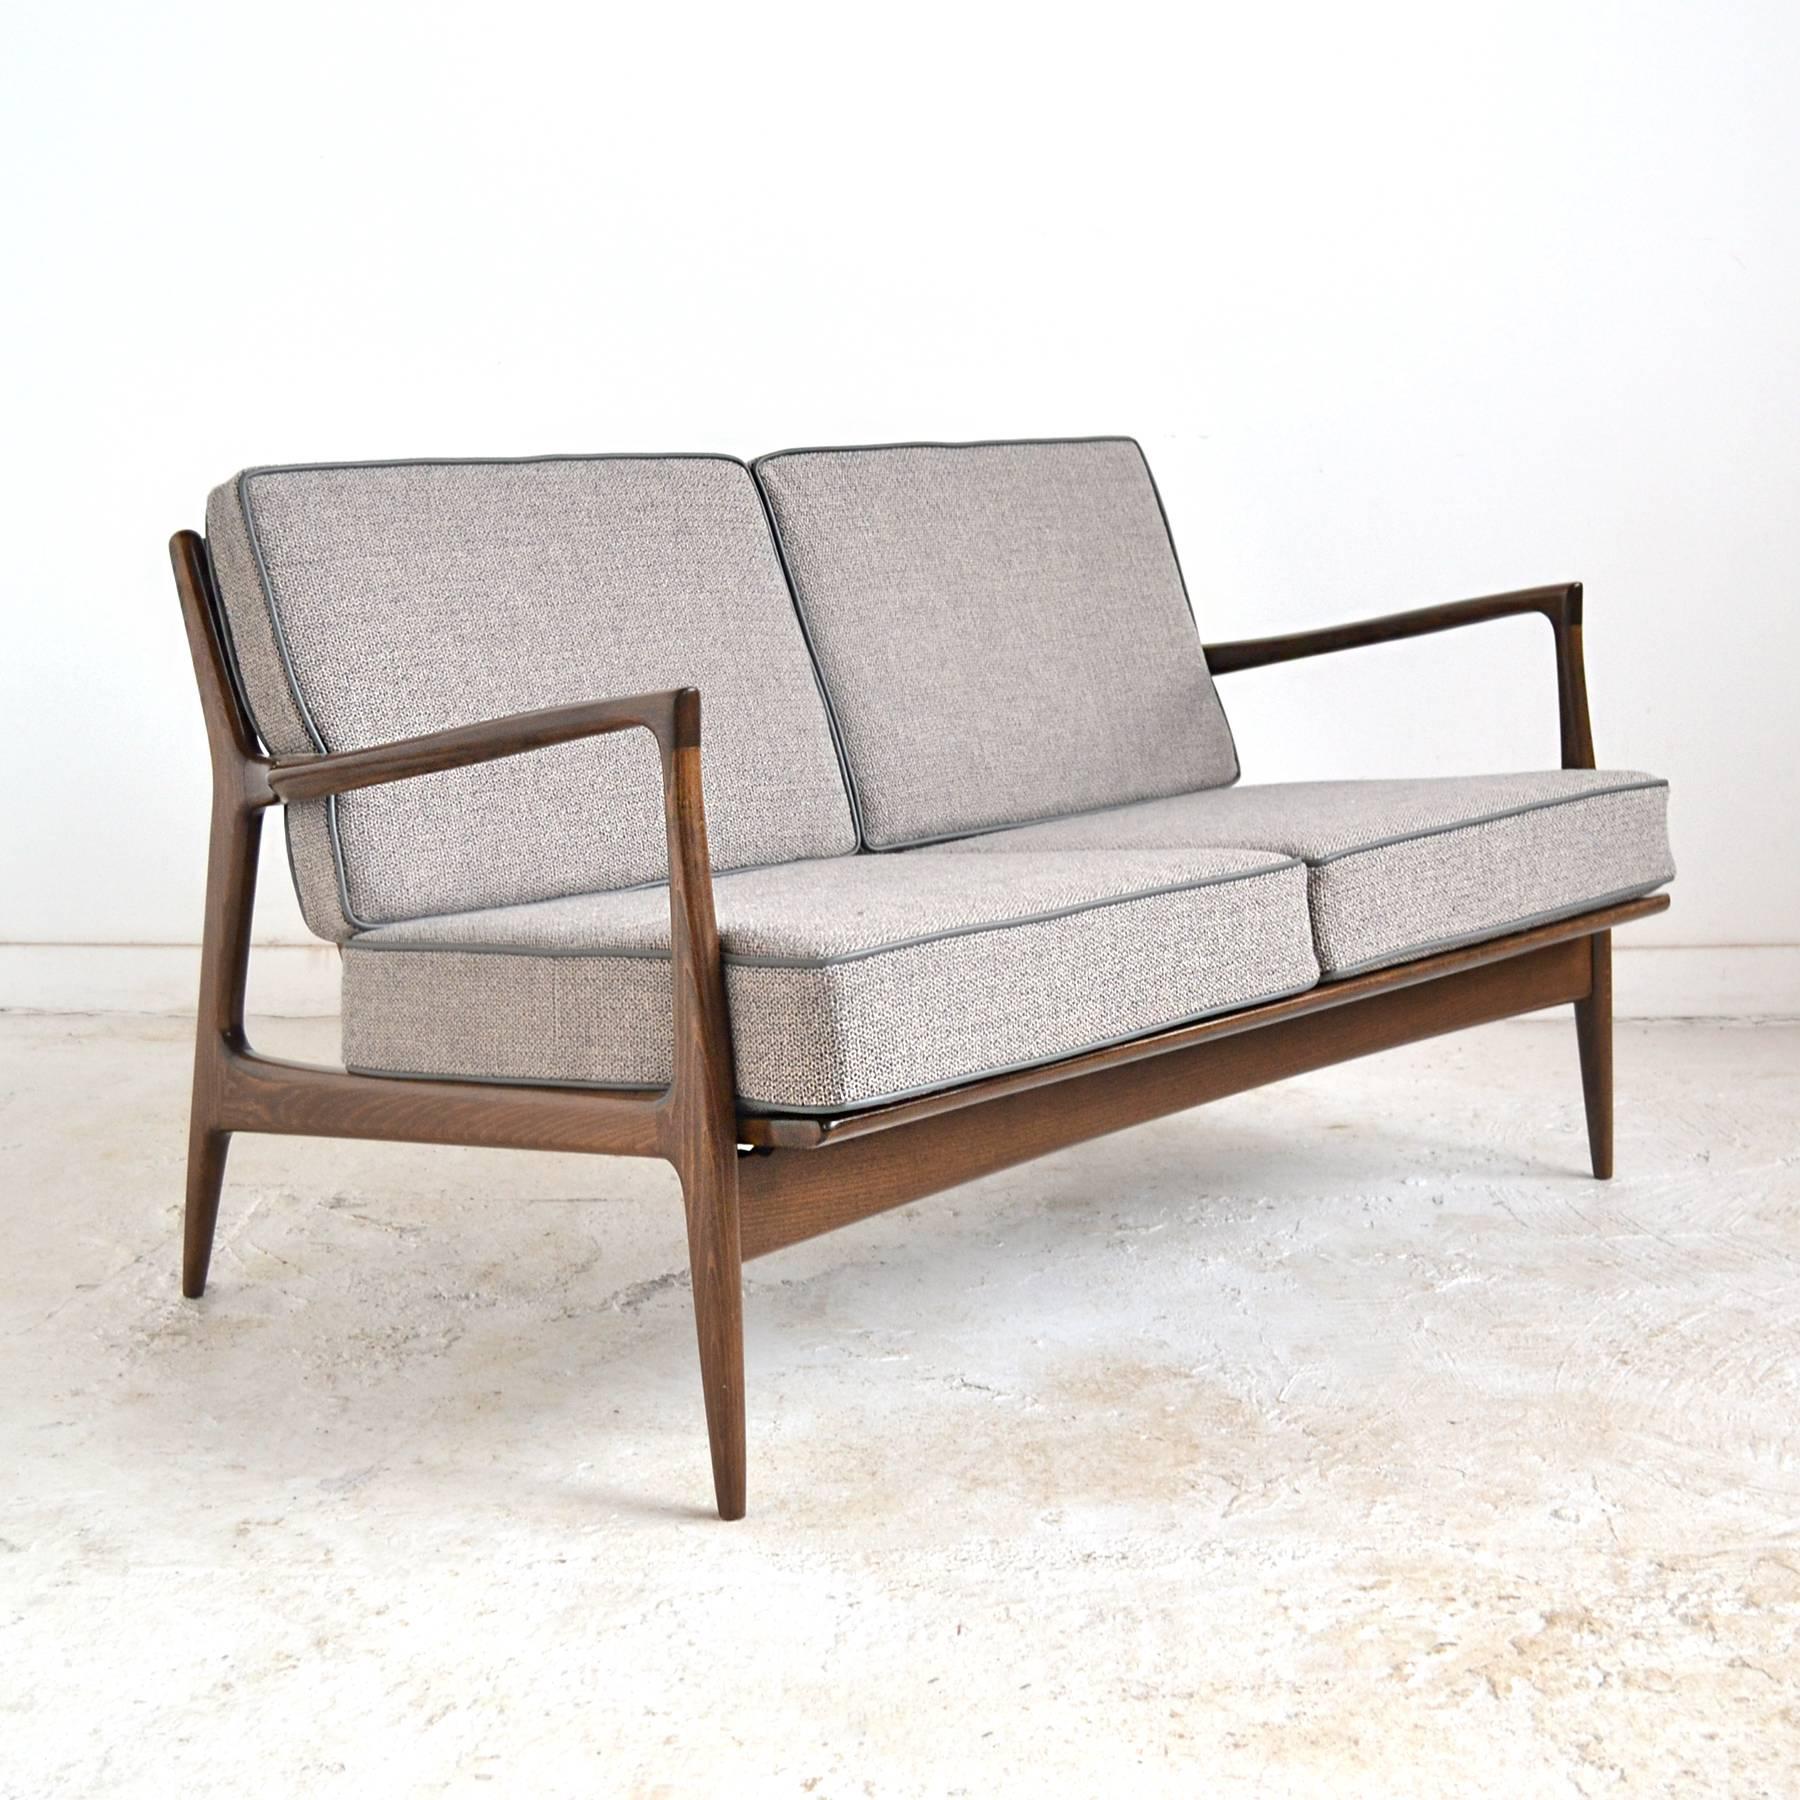 This two-seat sofa by Kofod-Larsen for Selig reflects the how significant the impact and popularity of Scandinavian design was in midcentury America. The subtle, elegant lines, light scale and fine craftsmanship appealed to the public and fit the